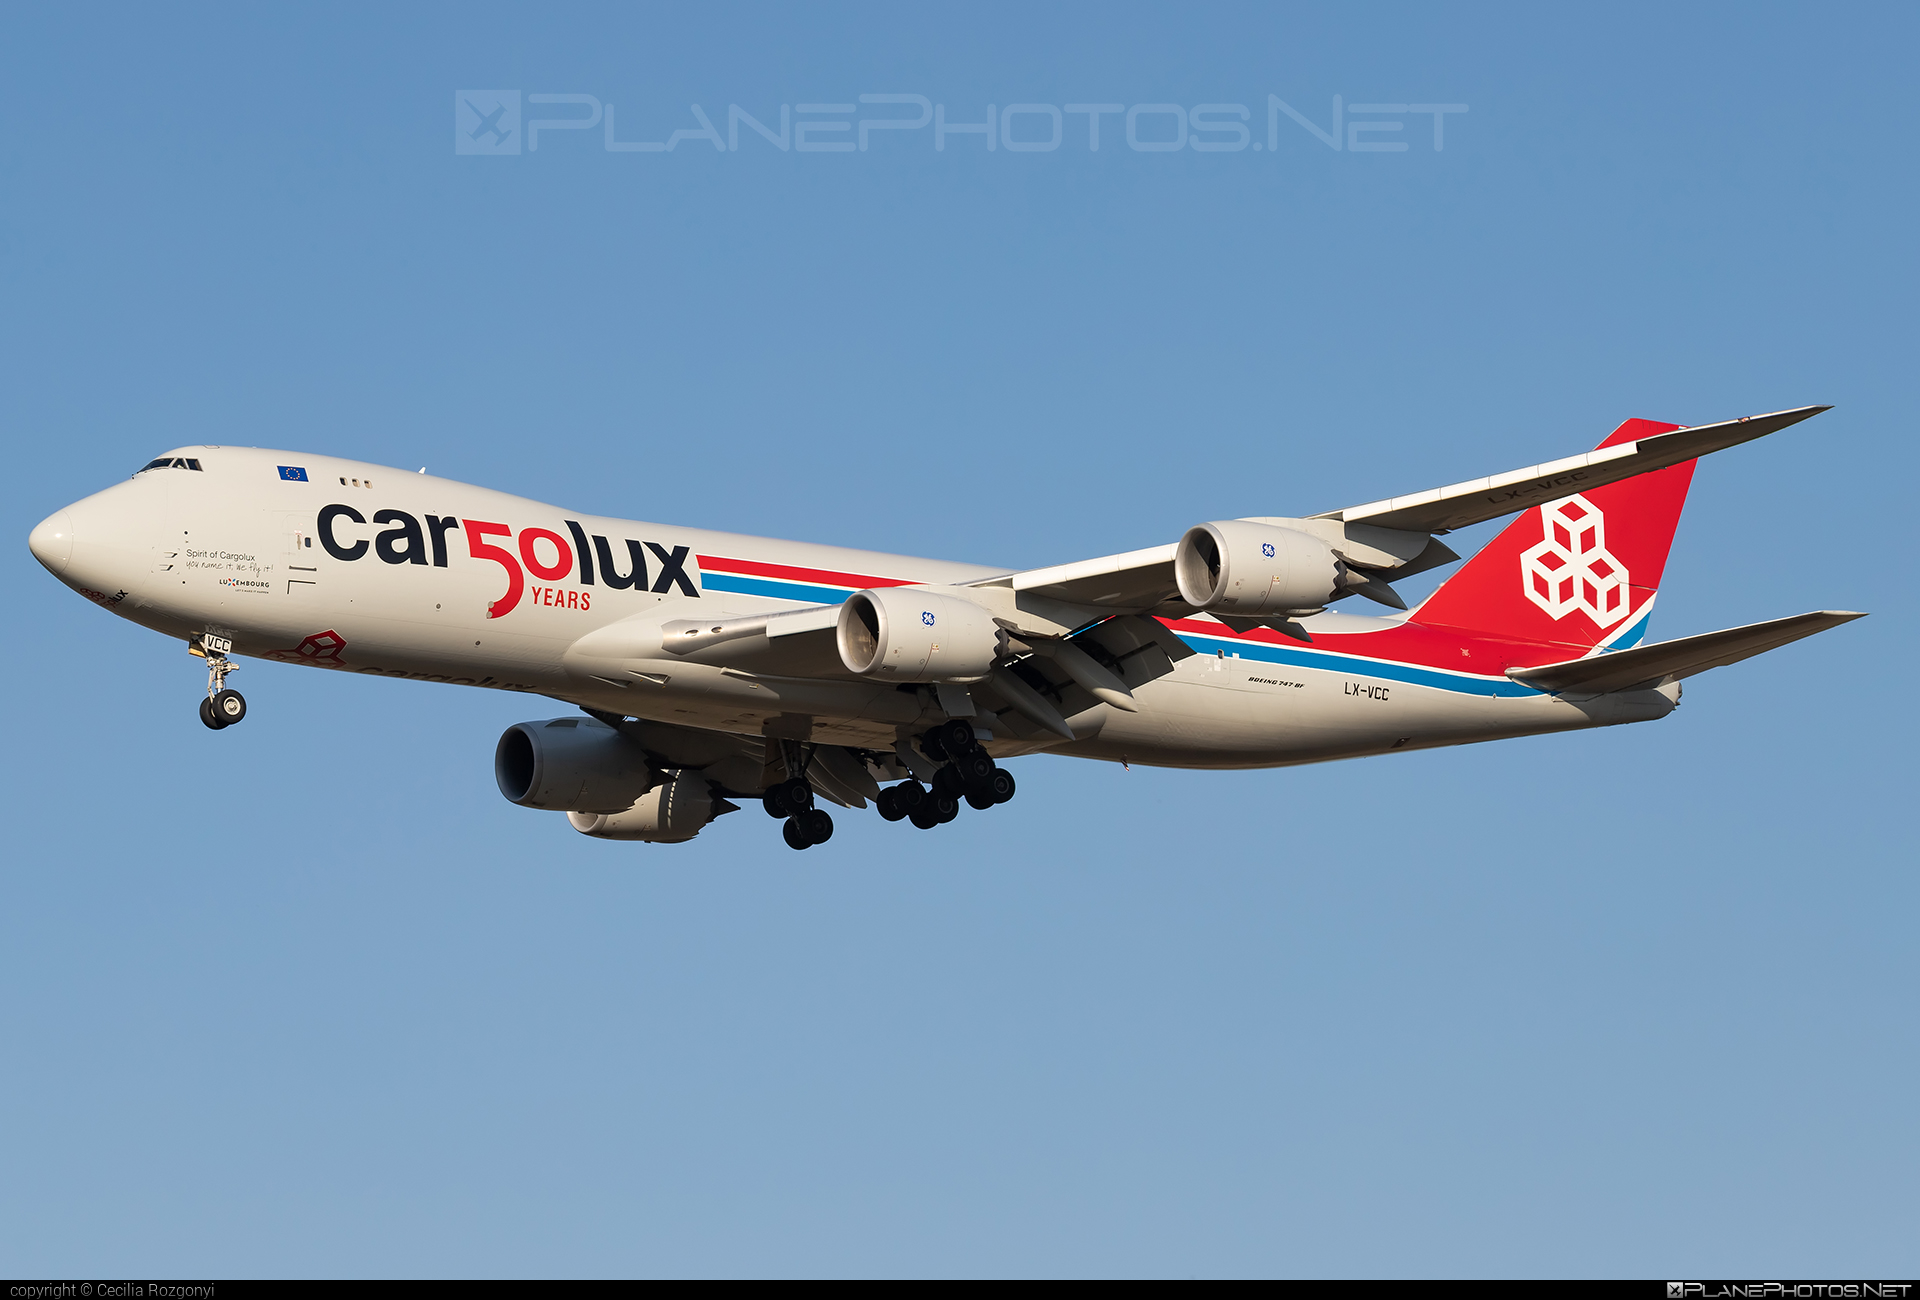 Boeing 747-8F - LX-VCC operated by Cargolux Airlines International #b747 #b747f #b747freighter #boeing #boeing747 #cargolux #jumbo